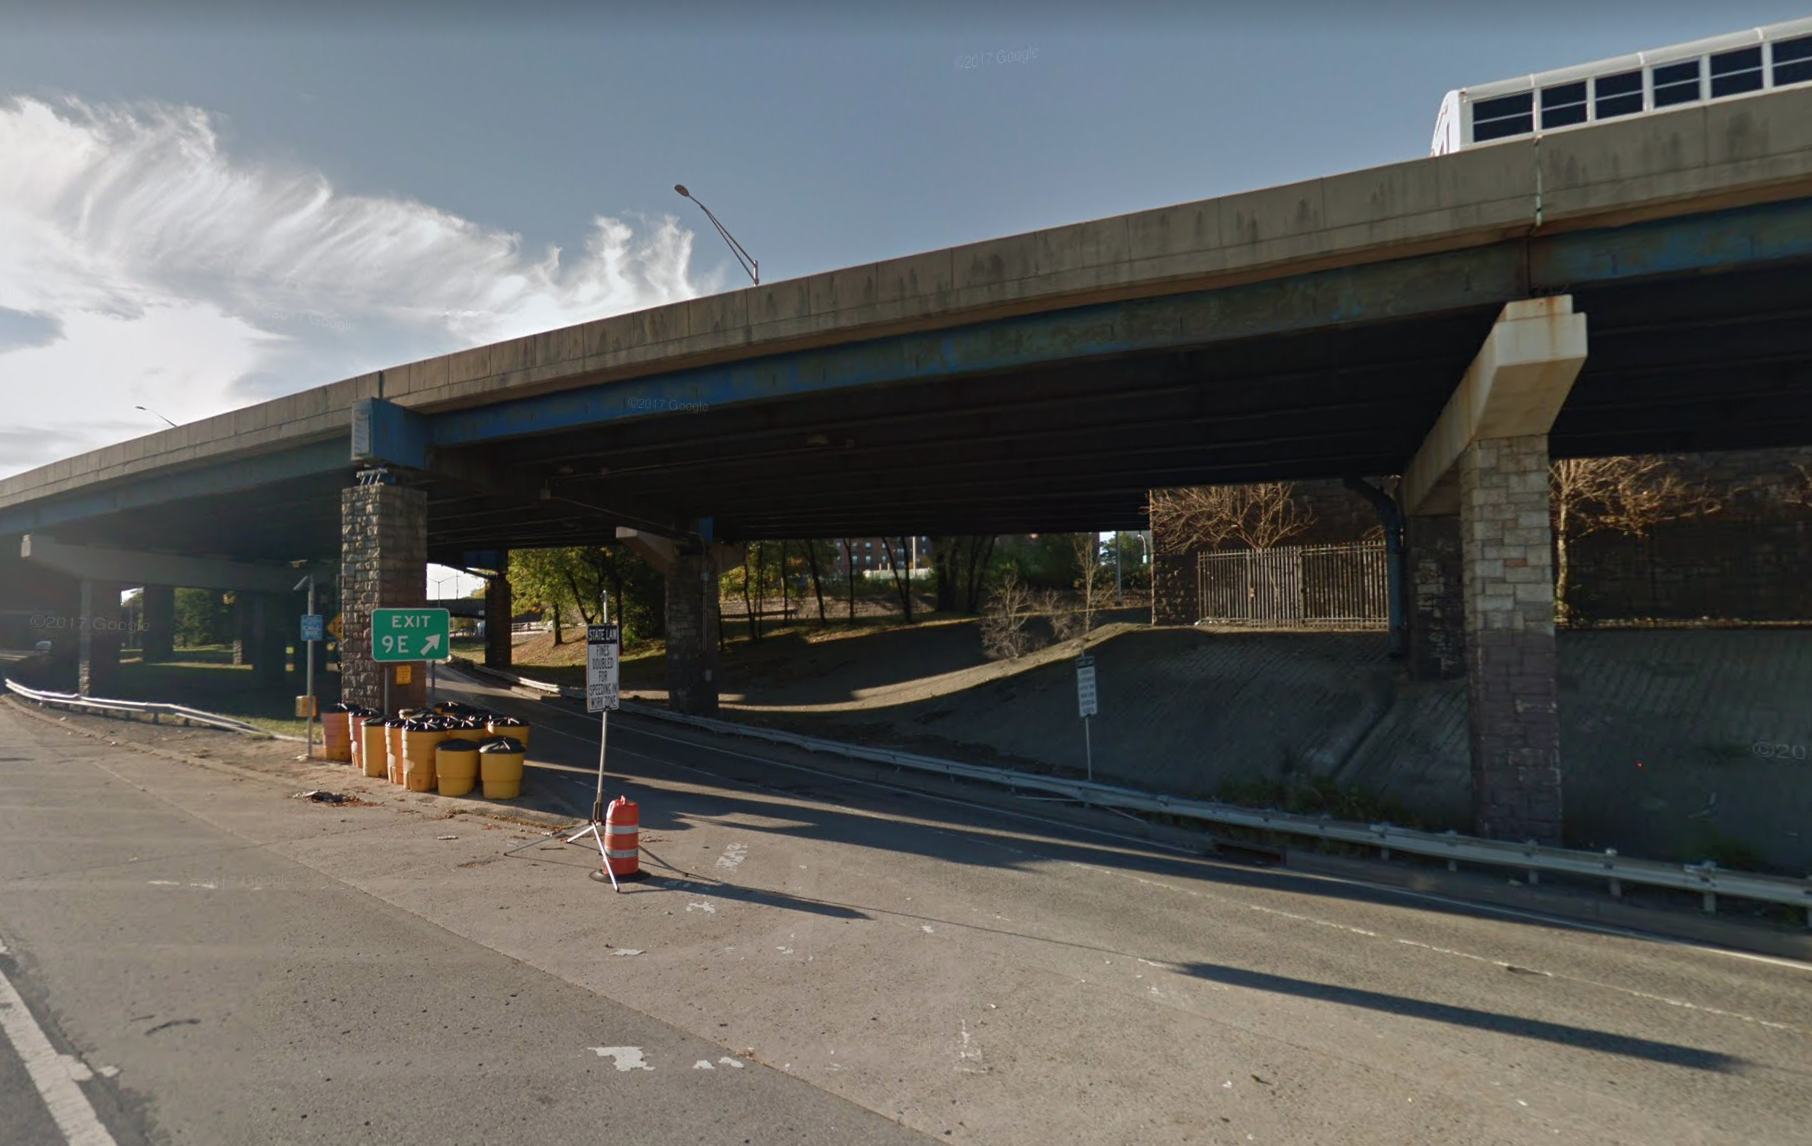 The Grand Central Parkway near the Astoria/Northern Boulevard overpass in East Elmhurst.